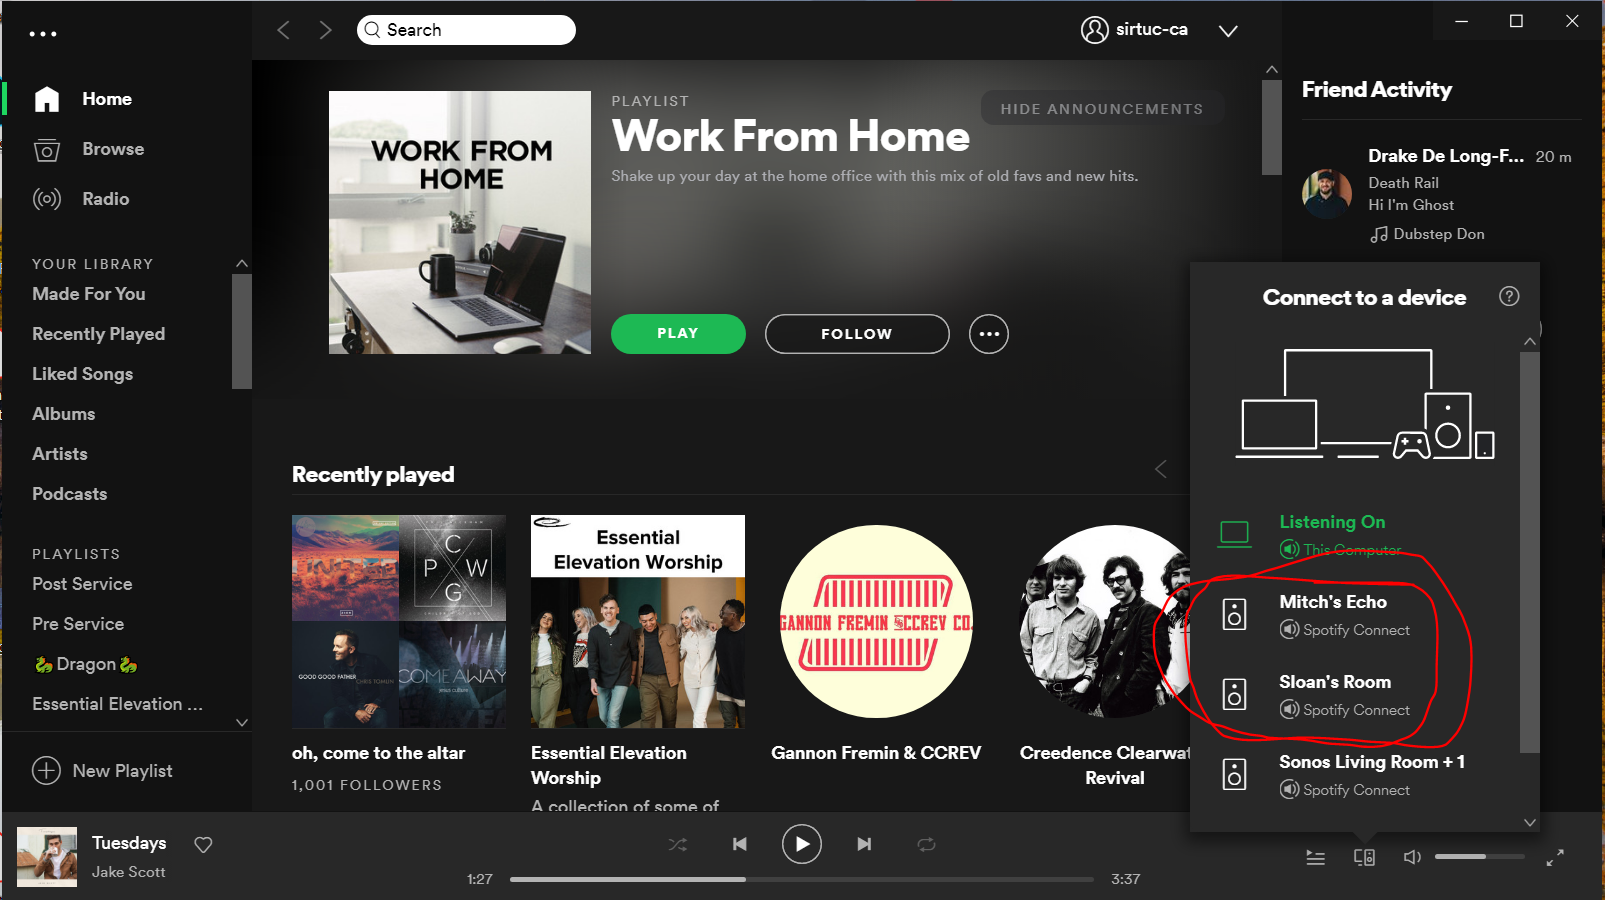 Removing Devices from 'Connect to a Device' list. - The Spotify Community